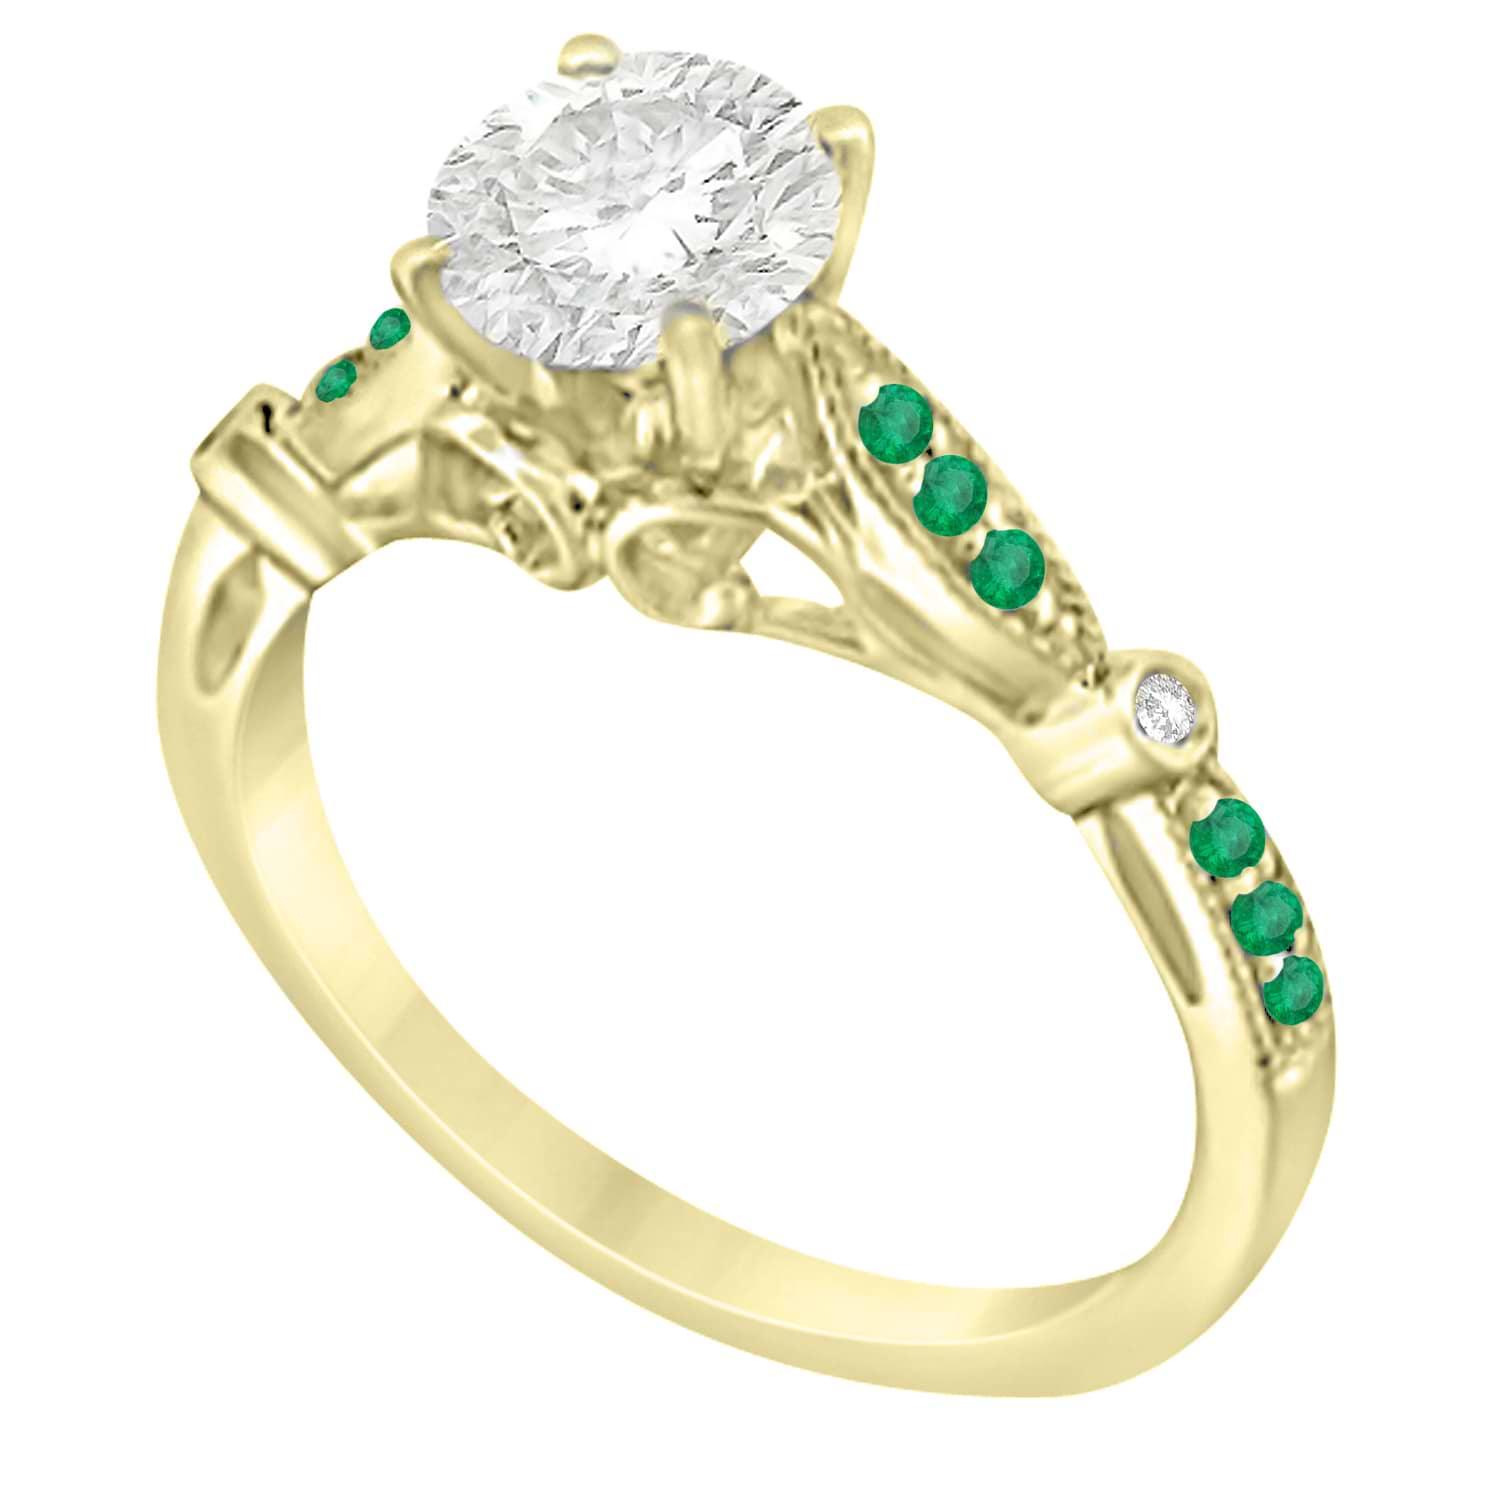 Marquise & Dot Emerald Vintage Engagement Ring 14k Yellow Gold 0.13ct